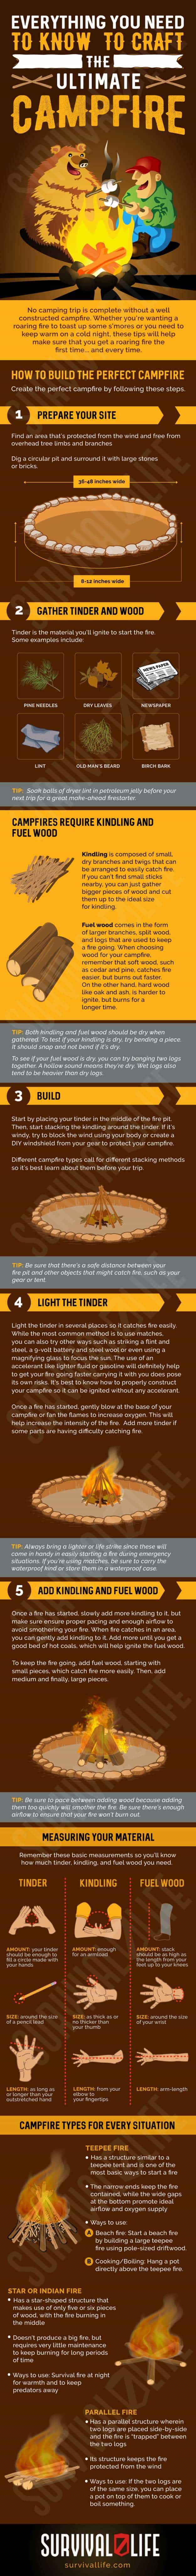 campfire infographic 20170904 Survival Life Everything You Need to Know About Building the Perfect Campfire 1